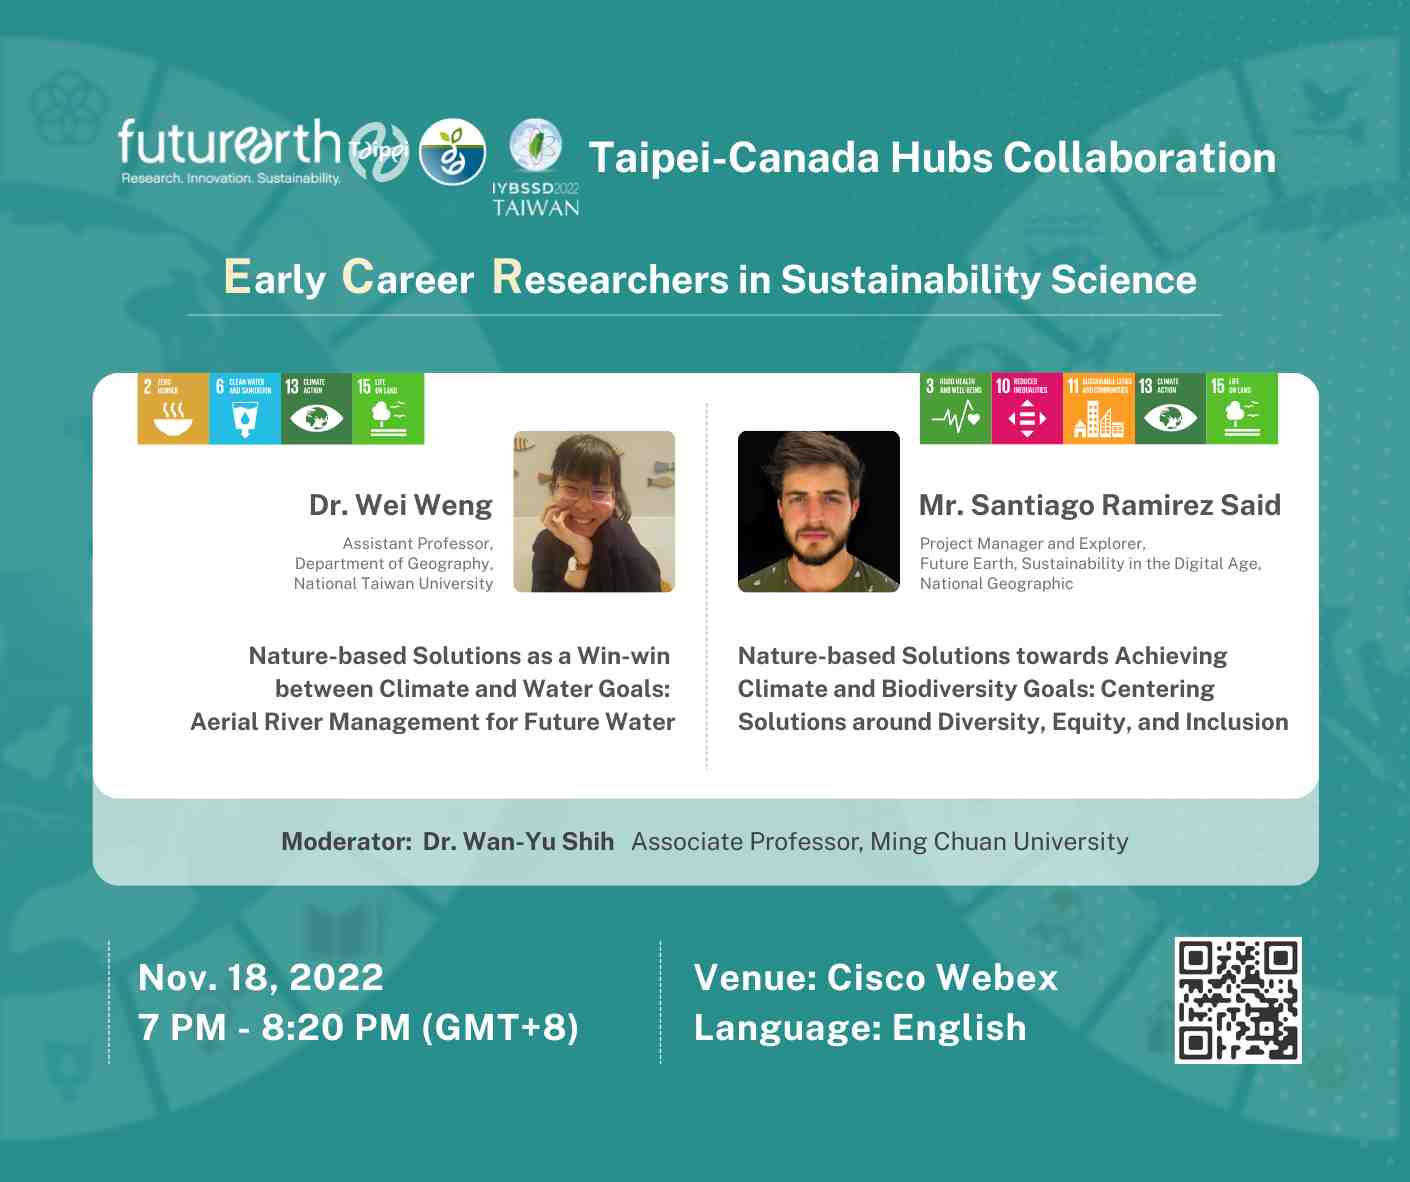 【Special Session ⭐️ 2022 ECRs in Sustainability Science 18】Taipei-Canada Hubs Collaboration: Nature-based solutions towards sustainability宣傳用圖片/海報